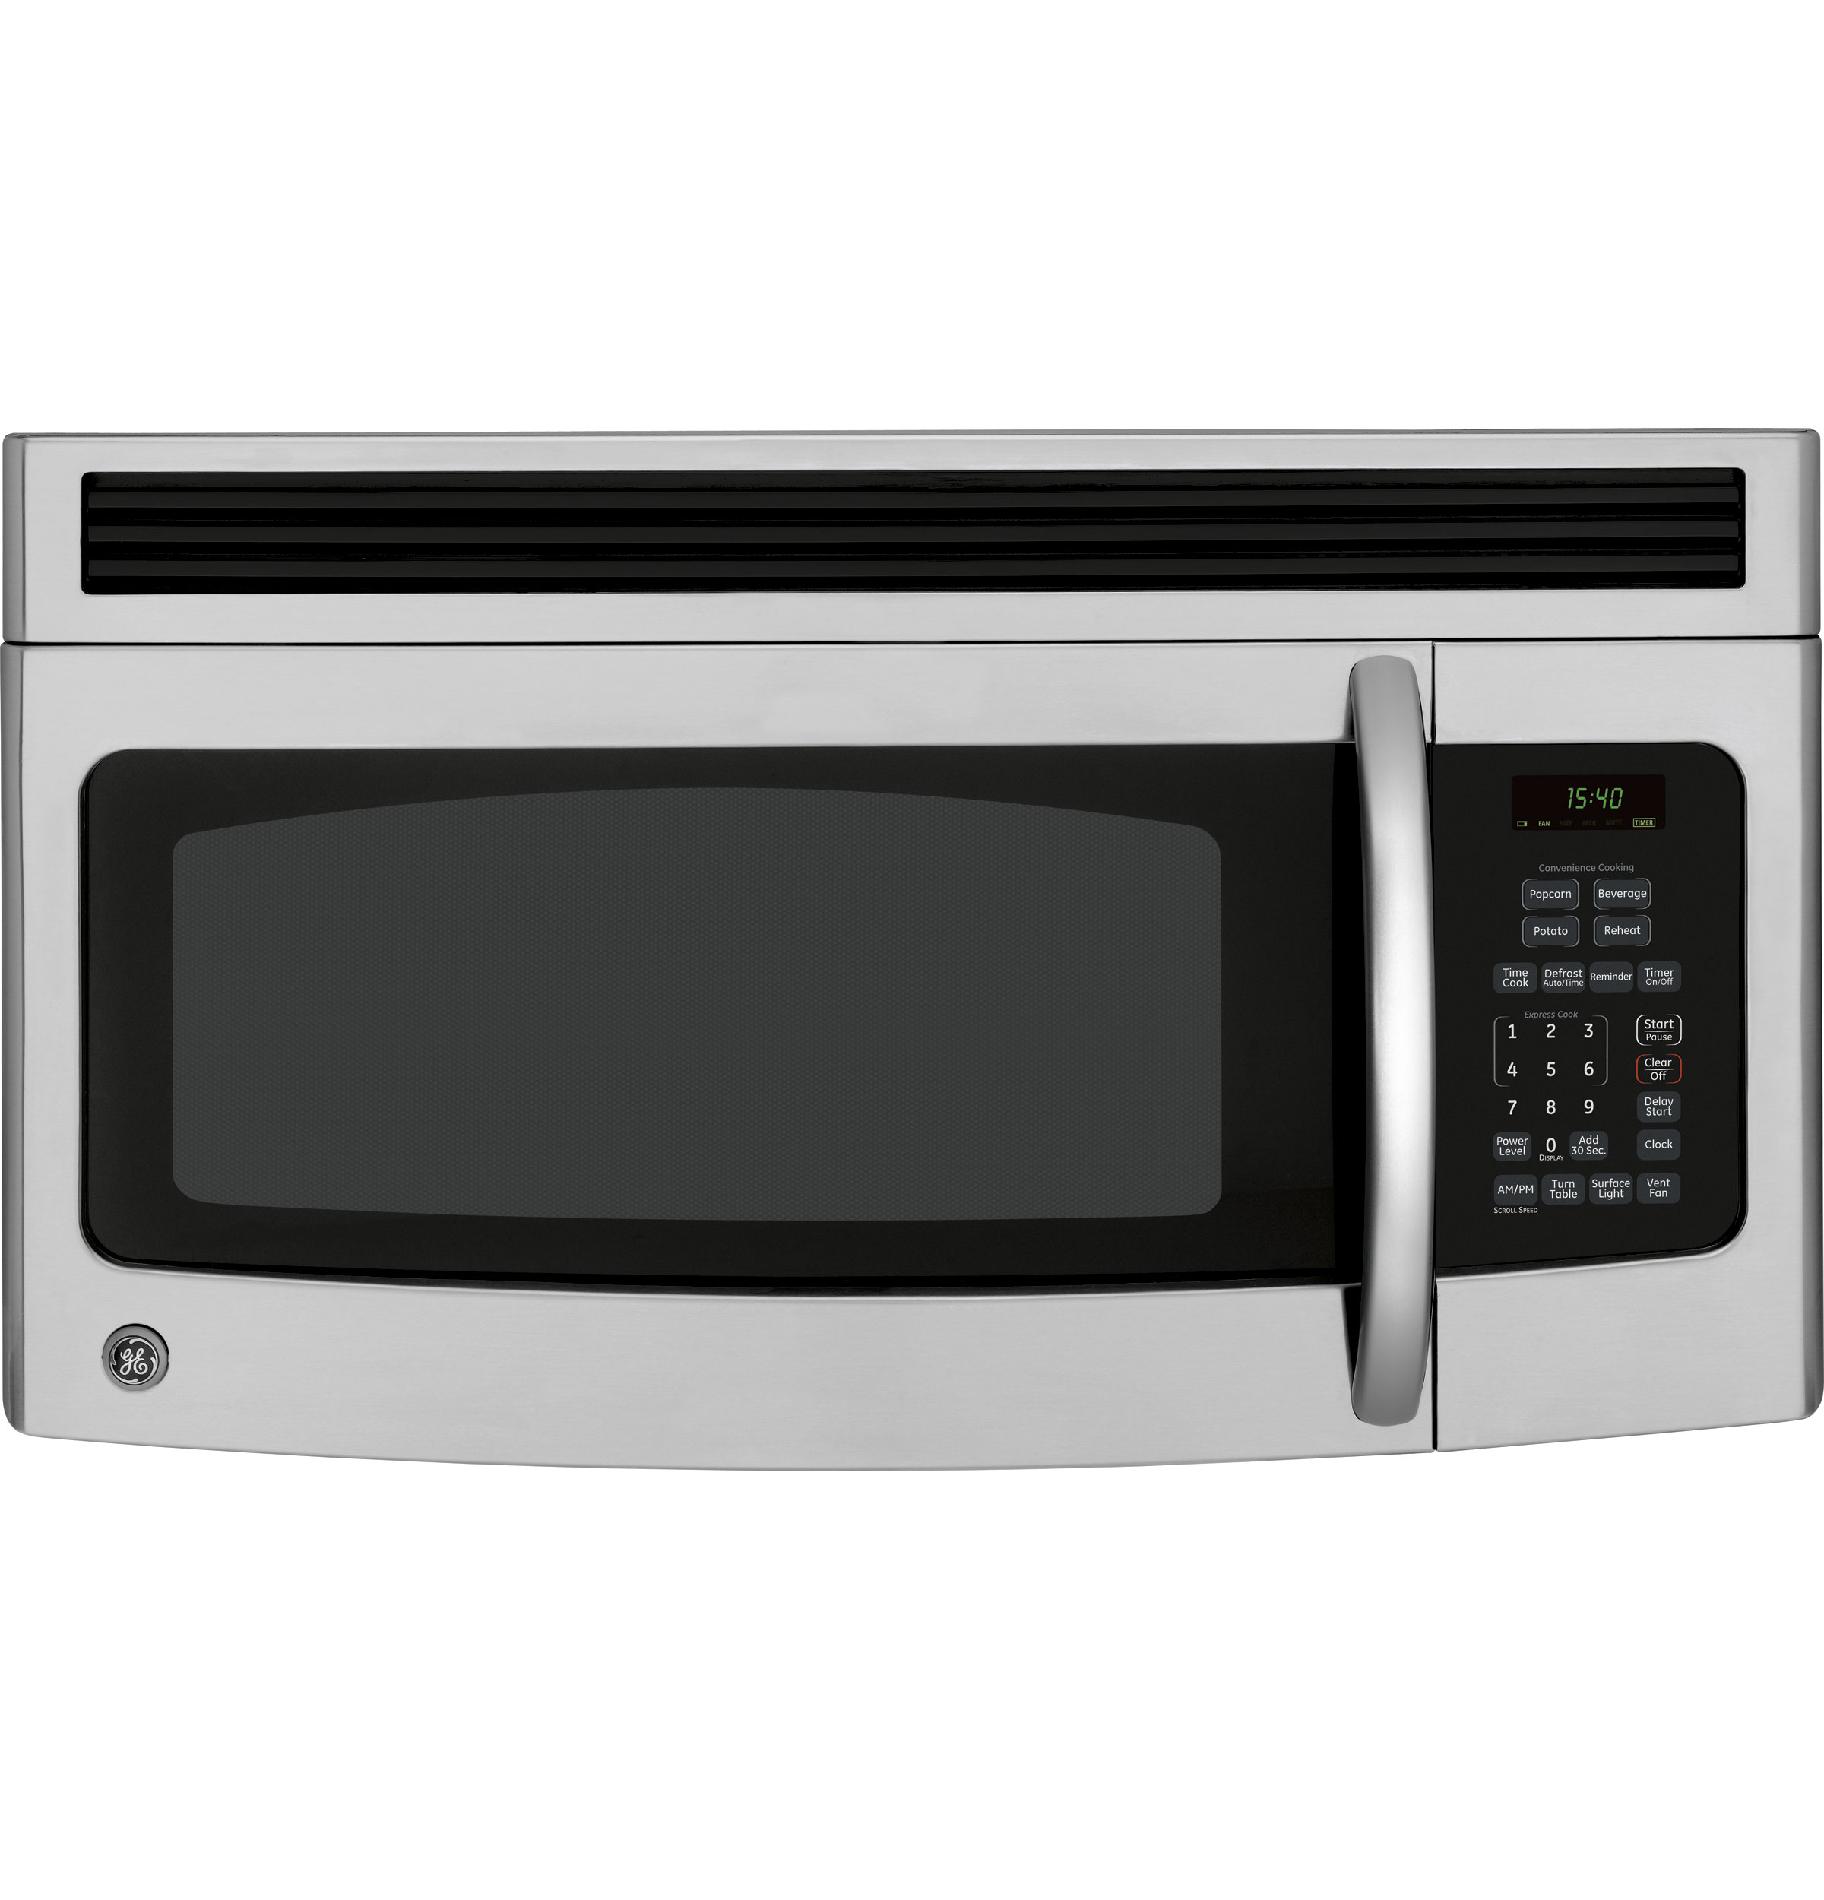 GE Appliances JVM1540SMSS 30" Over the Range Microwave Oven - Stainless